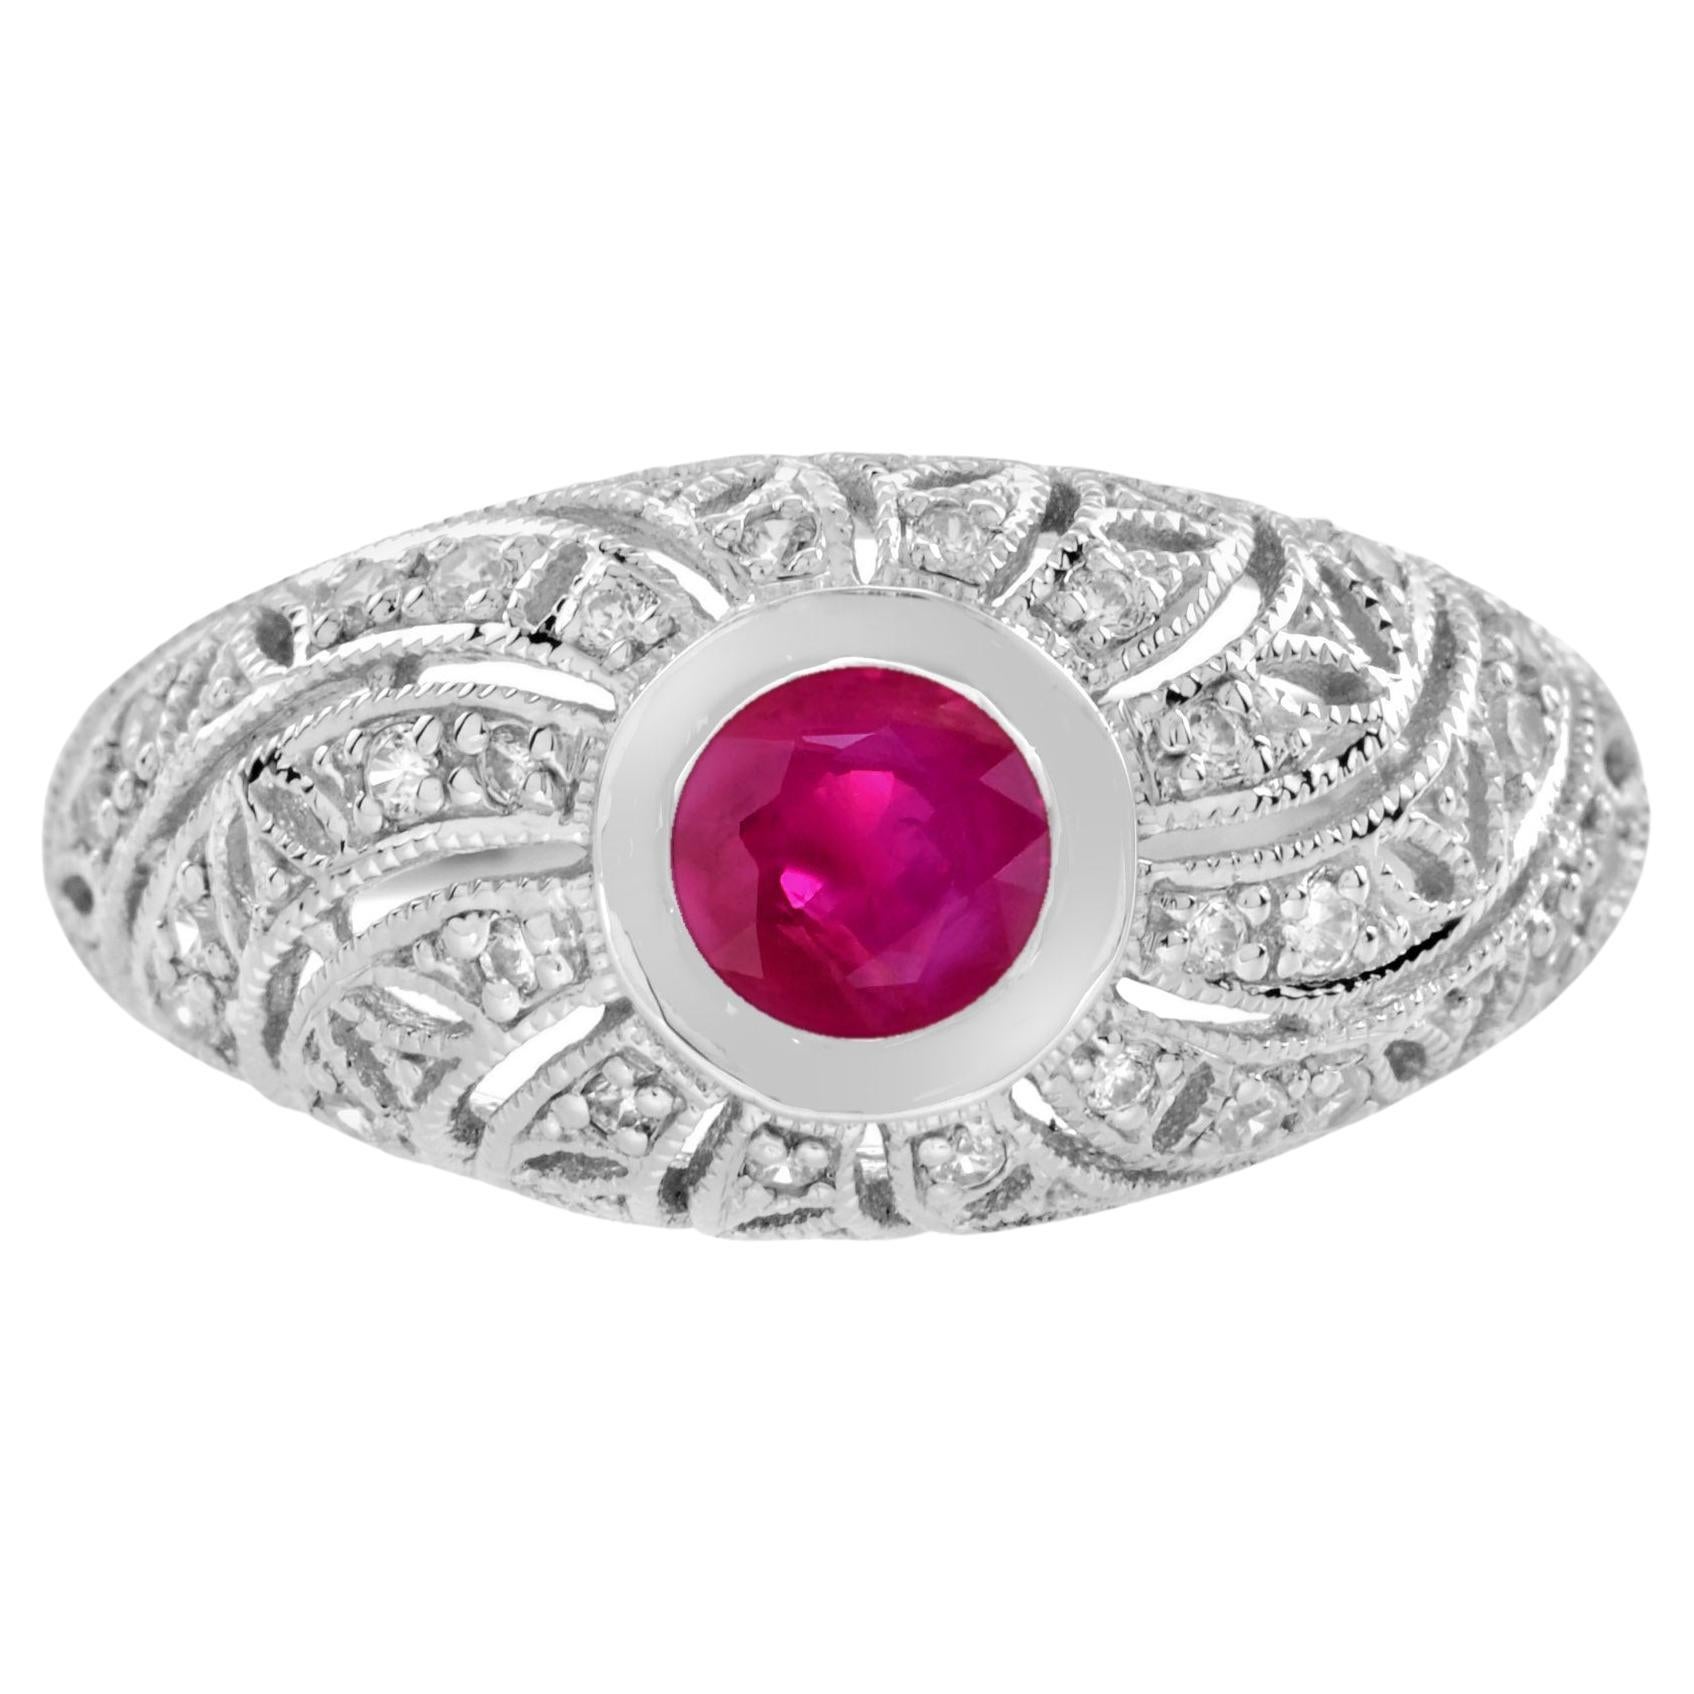 For Sale:  Ruby and Diamond Antique Style Engagement Ring in 14k White Gold